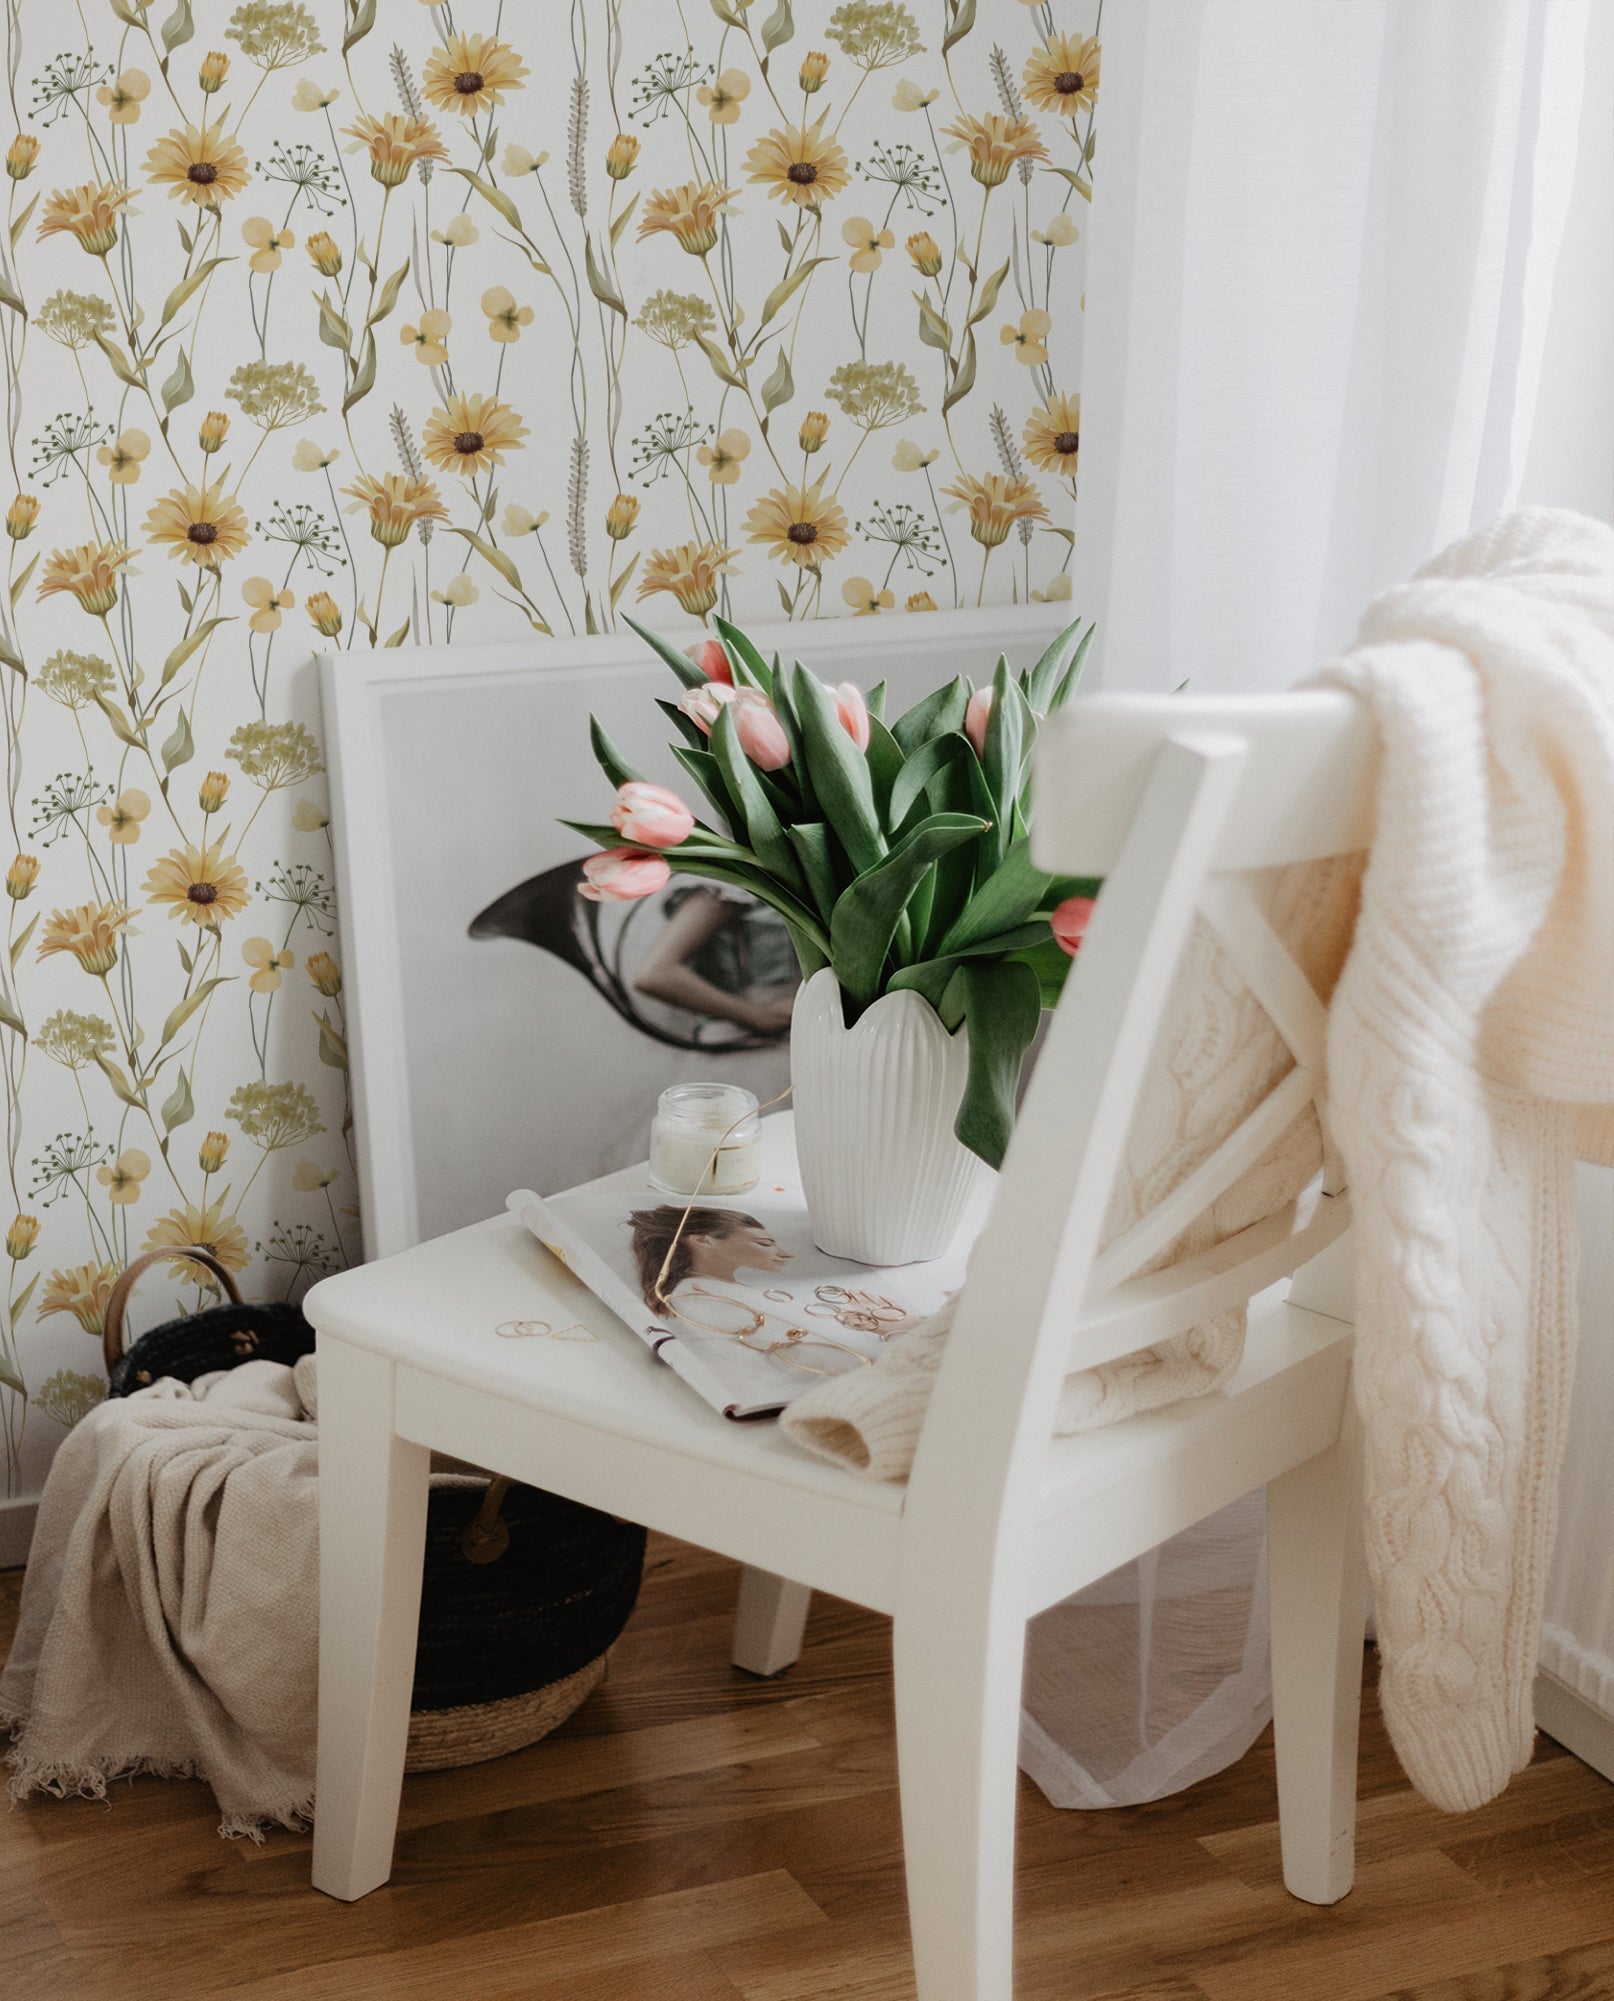 A cozy corner featuring the Watercolour Sunflower Wallpaper adorned with charming sunflowers and delicate flora in watercolor tones of yellow and green. A white chair with a vase of vibrant tulips adds a fresh touch to the inviting scene.